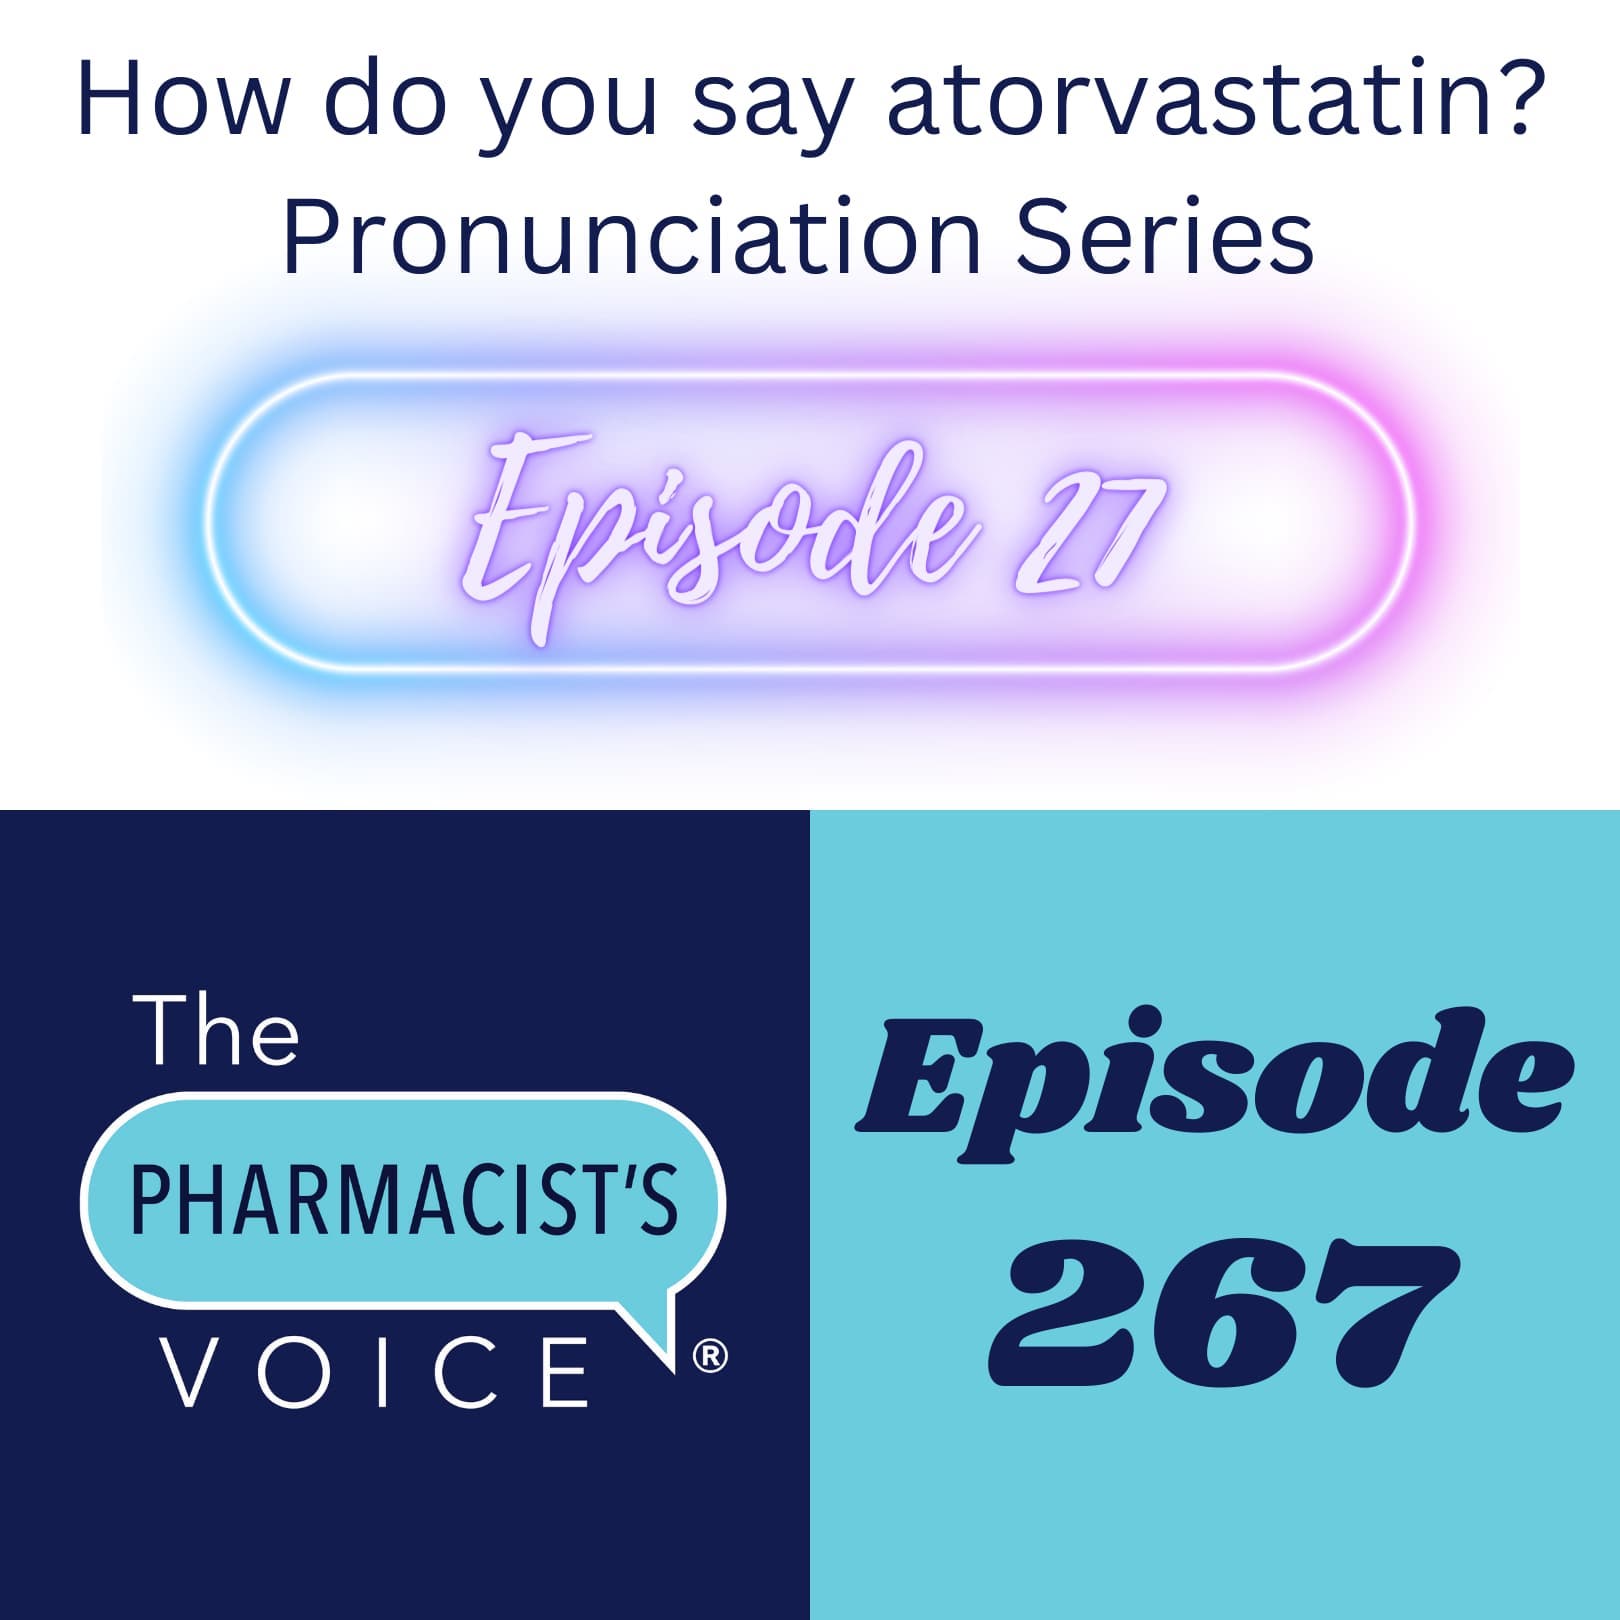 The Pharmacist's Voice Podcast Episode 267. How do you say atorvastatin? Pronunciations Series Episode 27.